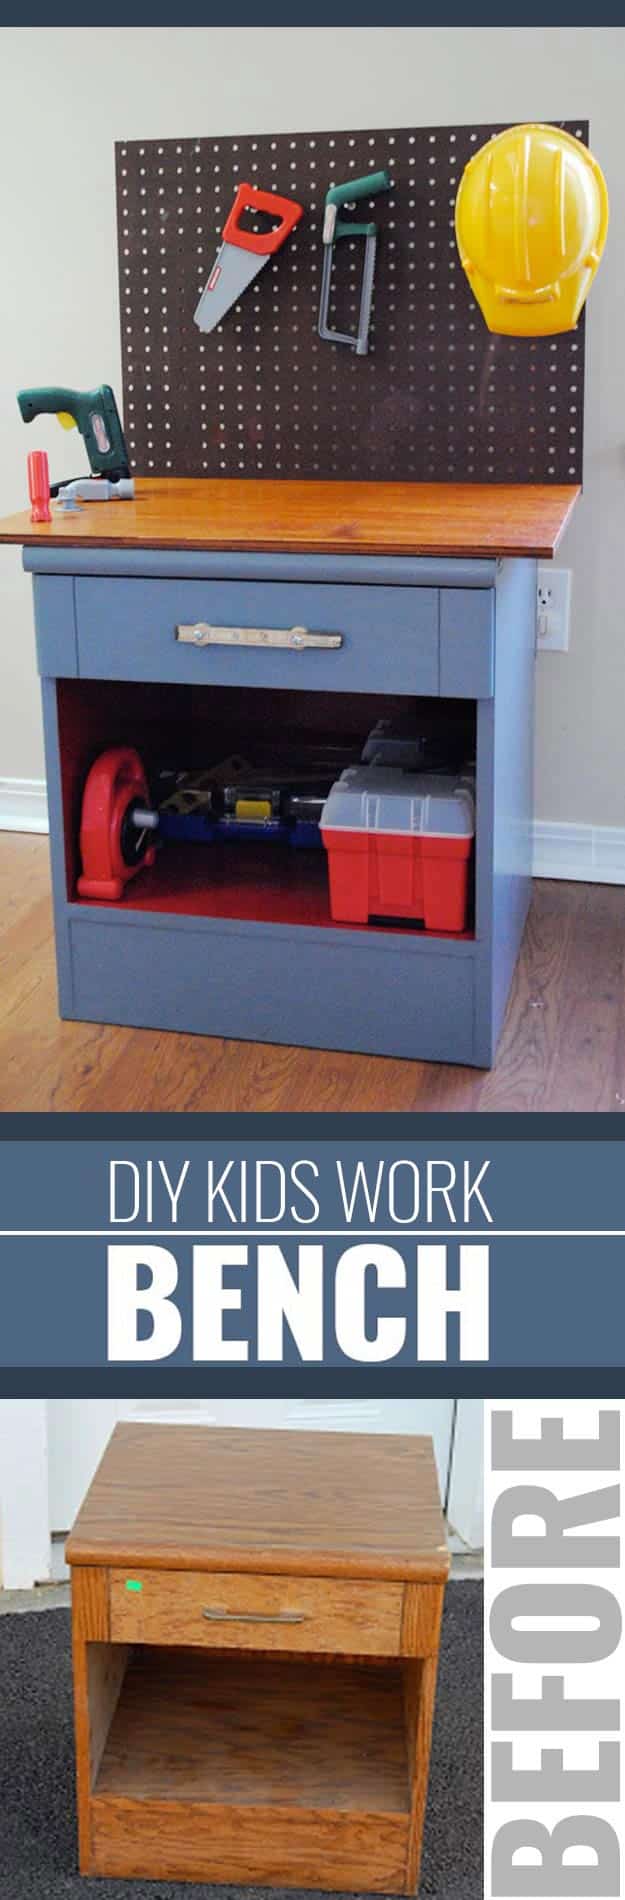 DIY Christmas Gifts for Kids - Homemade Christmas Presents for Children and Christmas Crafts for Kids | Toys,  Dress Up Clothes, Dolls and Fun Games |  Step by Step tutorials and instructions for cool gifts to make for boys and girls |  Kiddie Workbench |  http://diyjoy.com/diy-christmas-gifts-for-kids